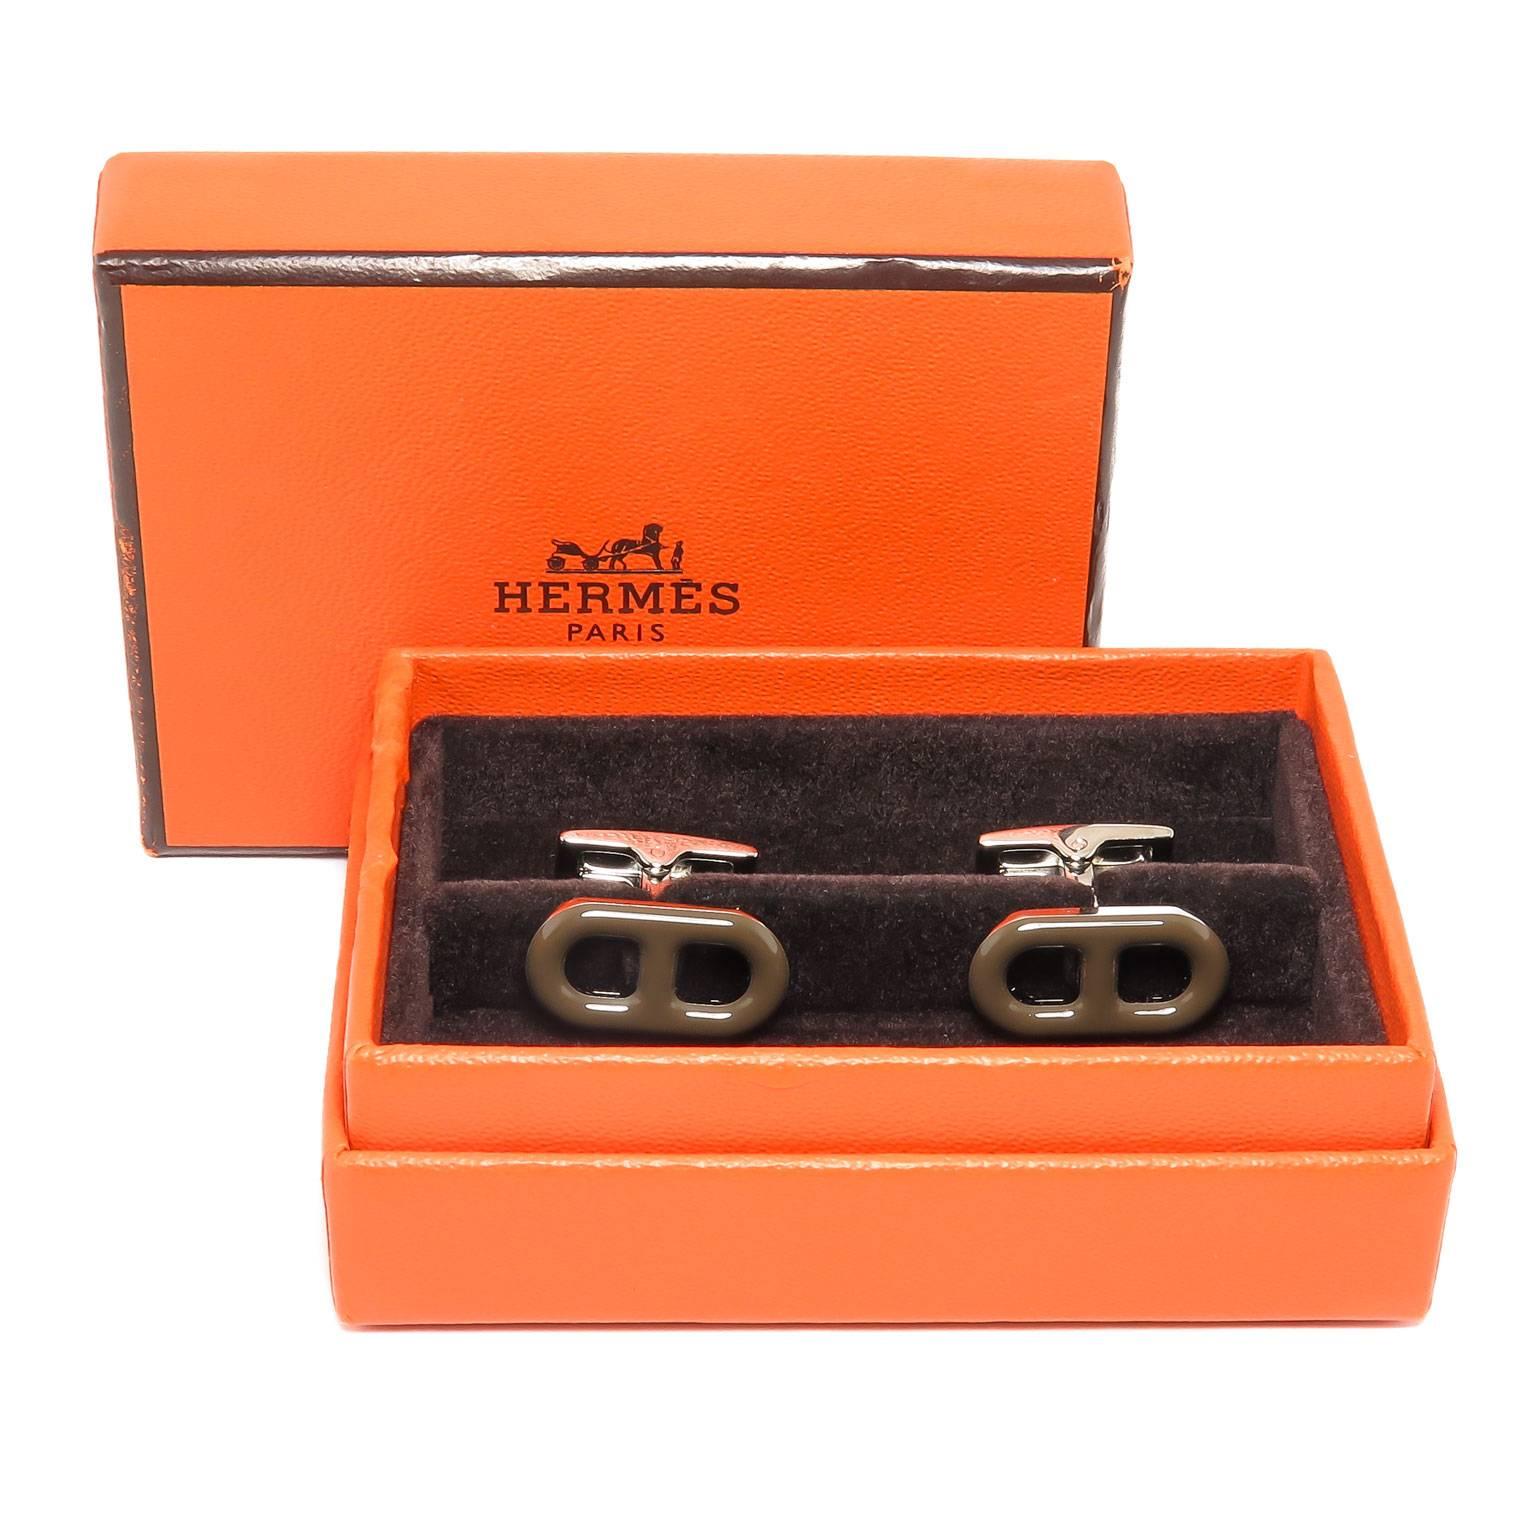 Circa 2005 Hermes Cufflinks, High Polished Metal and Chocolate Brown Enamel. These are new old Stock, never worn and in the original Hermes Gift Box. Measuring 3/4 inch in length across the top.